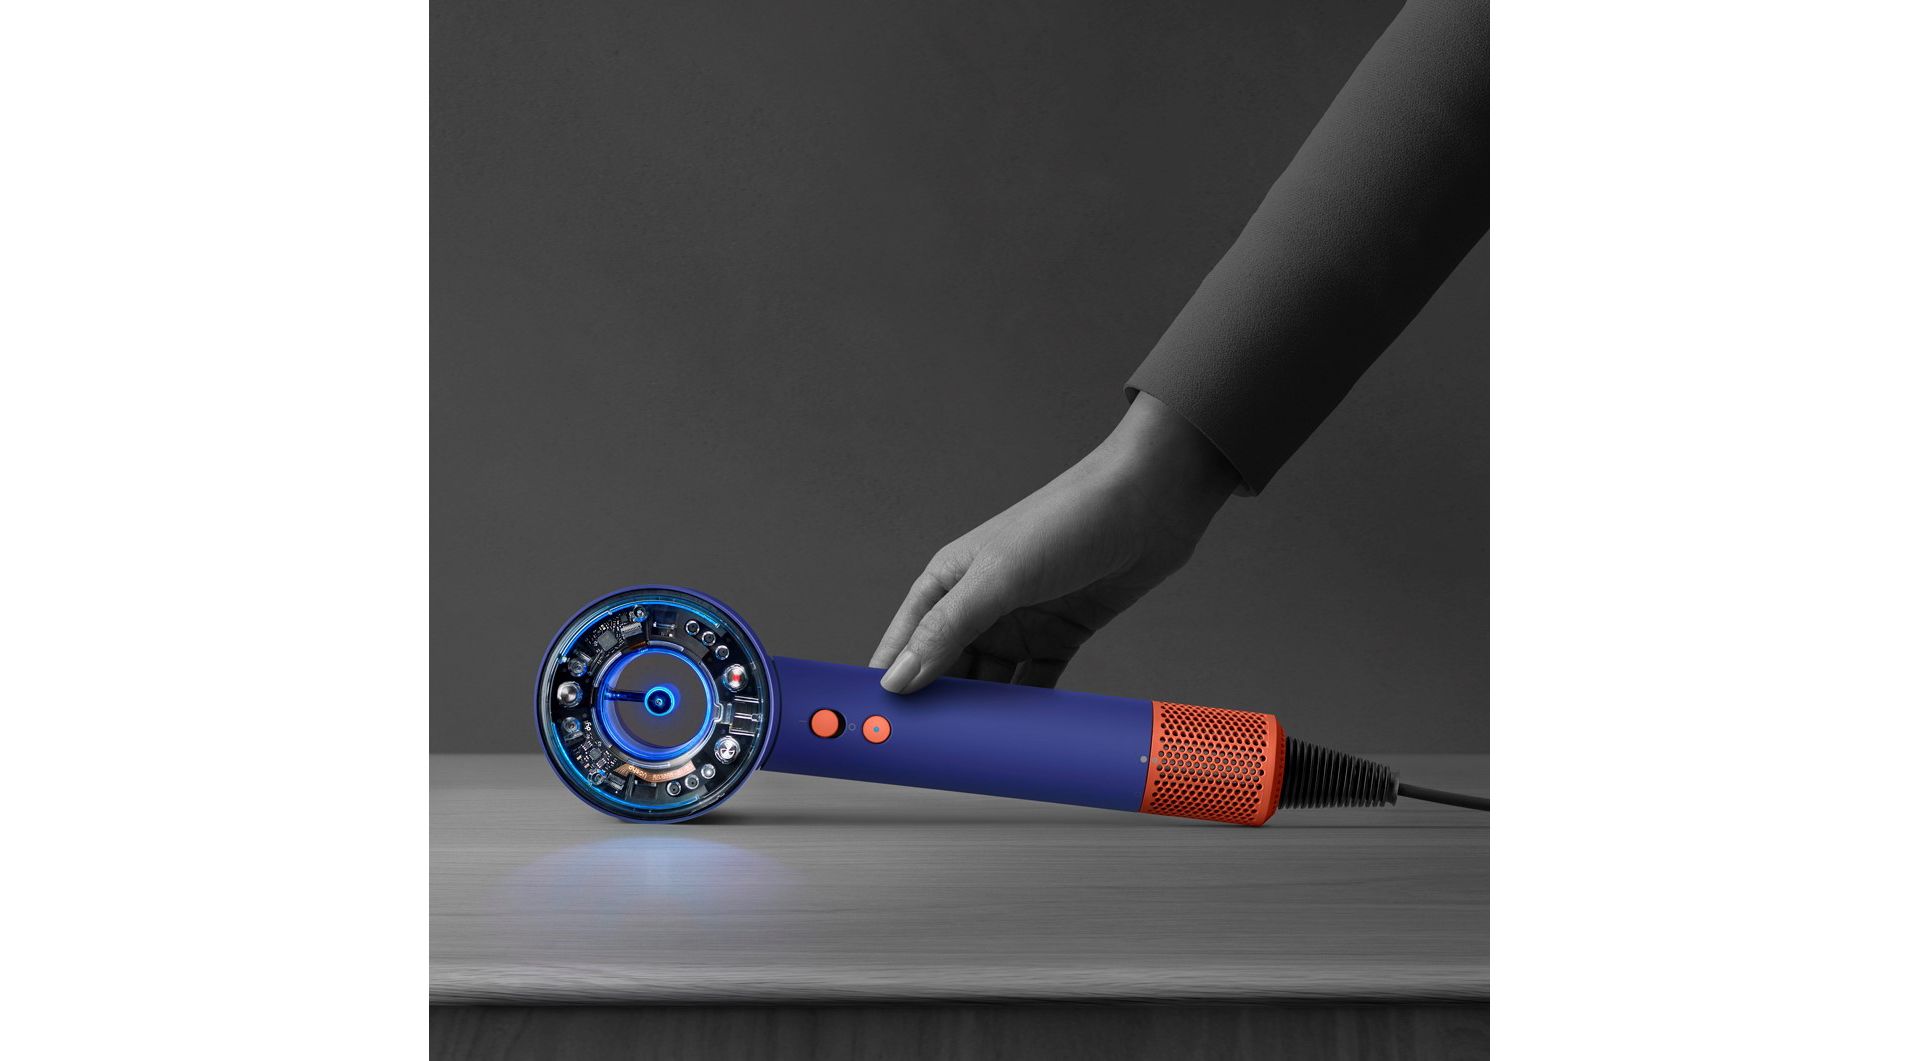 Introducing the Dyson Supersonic Nural™ hair dryer